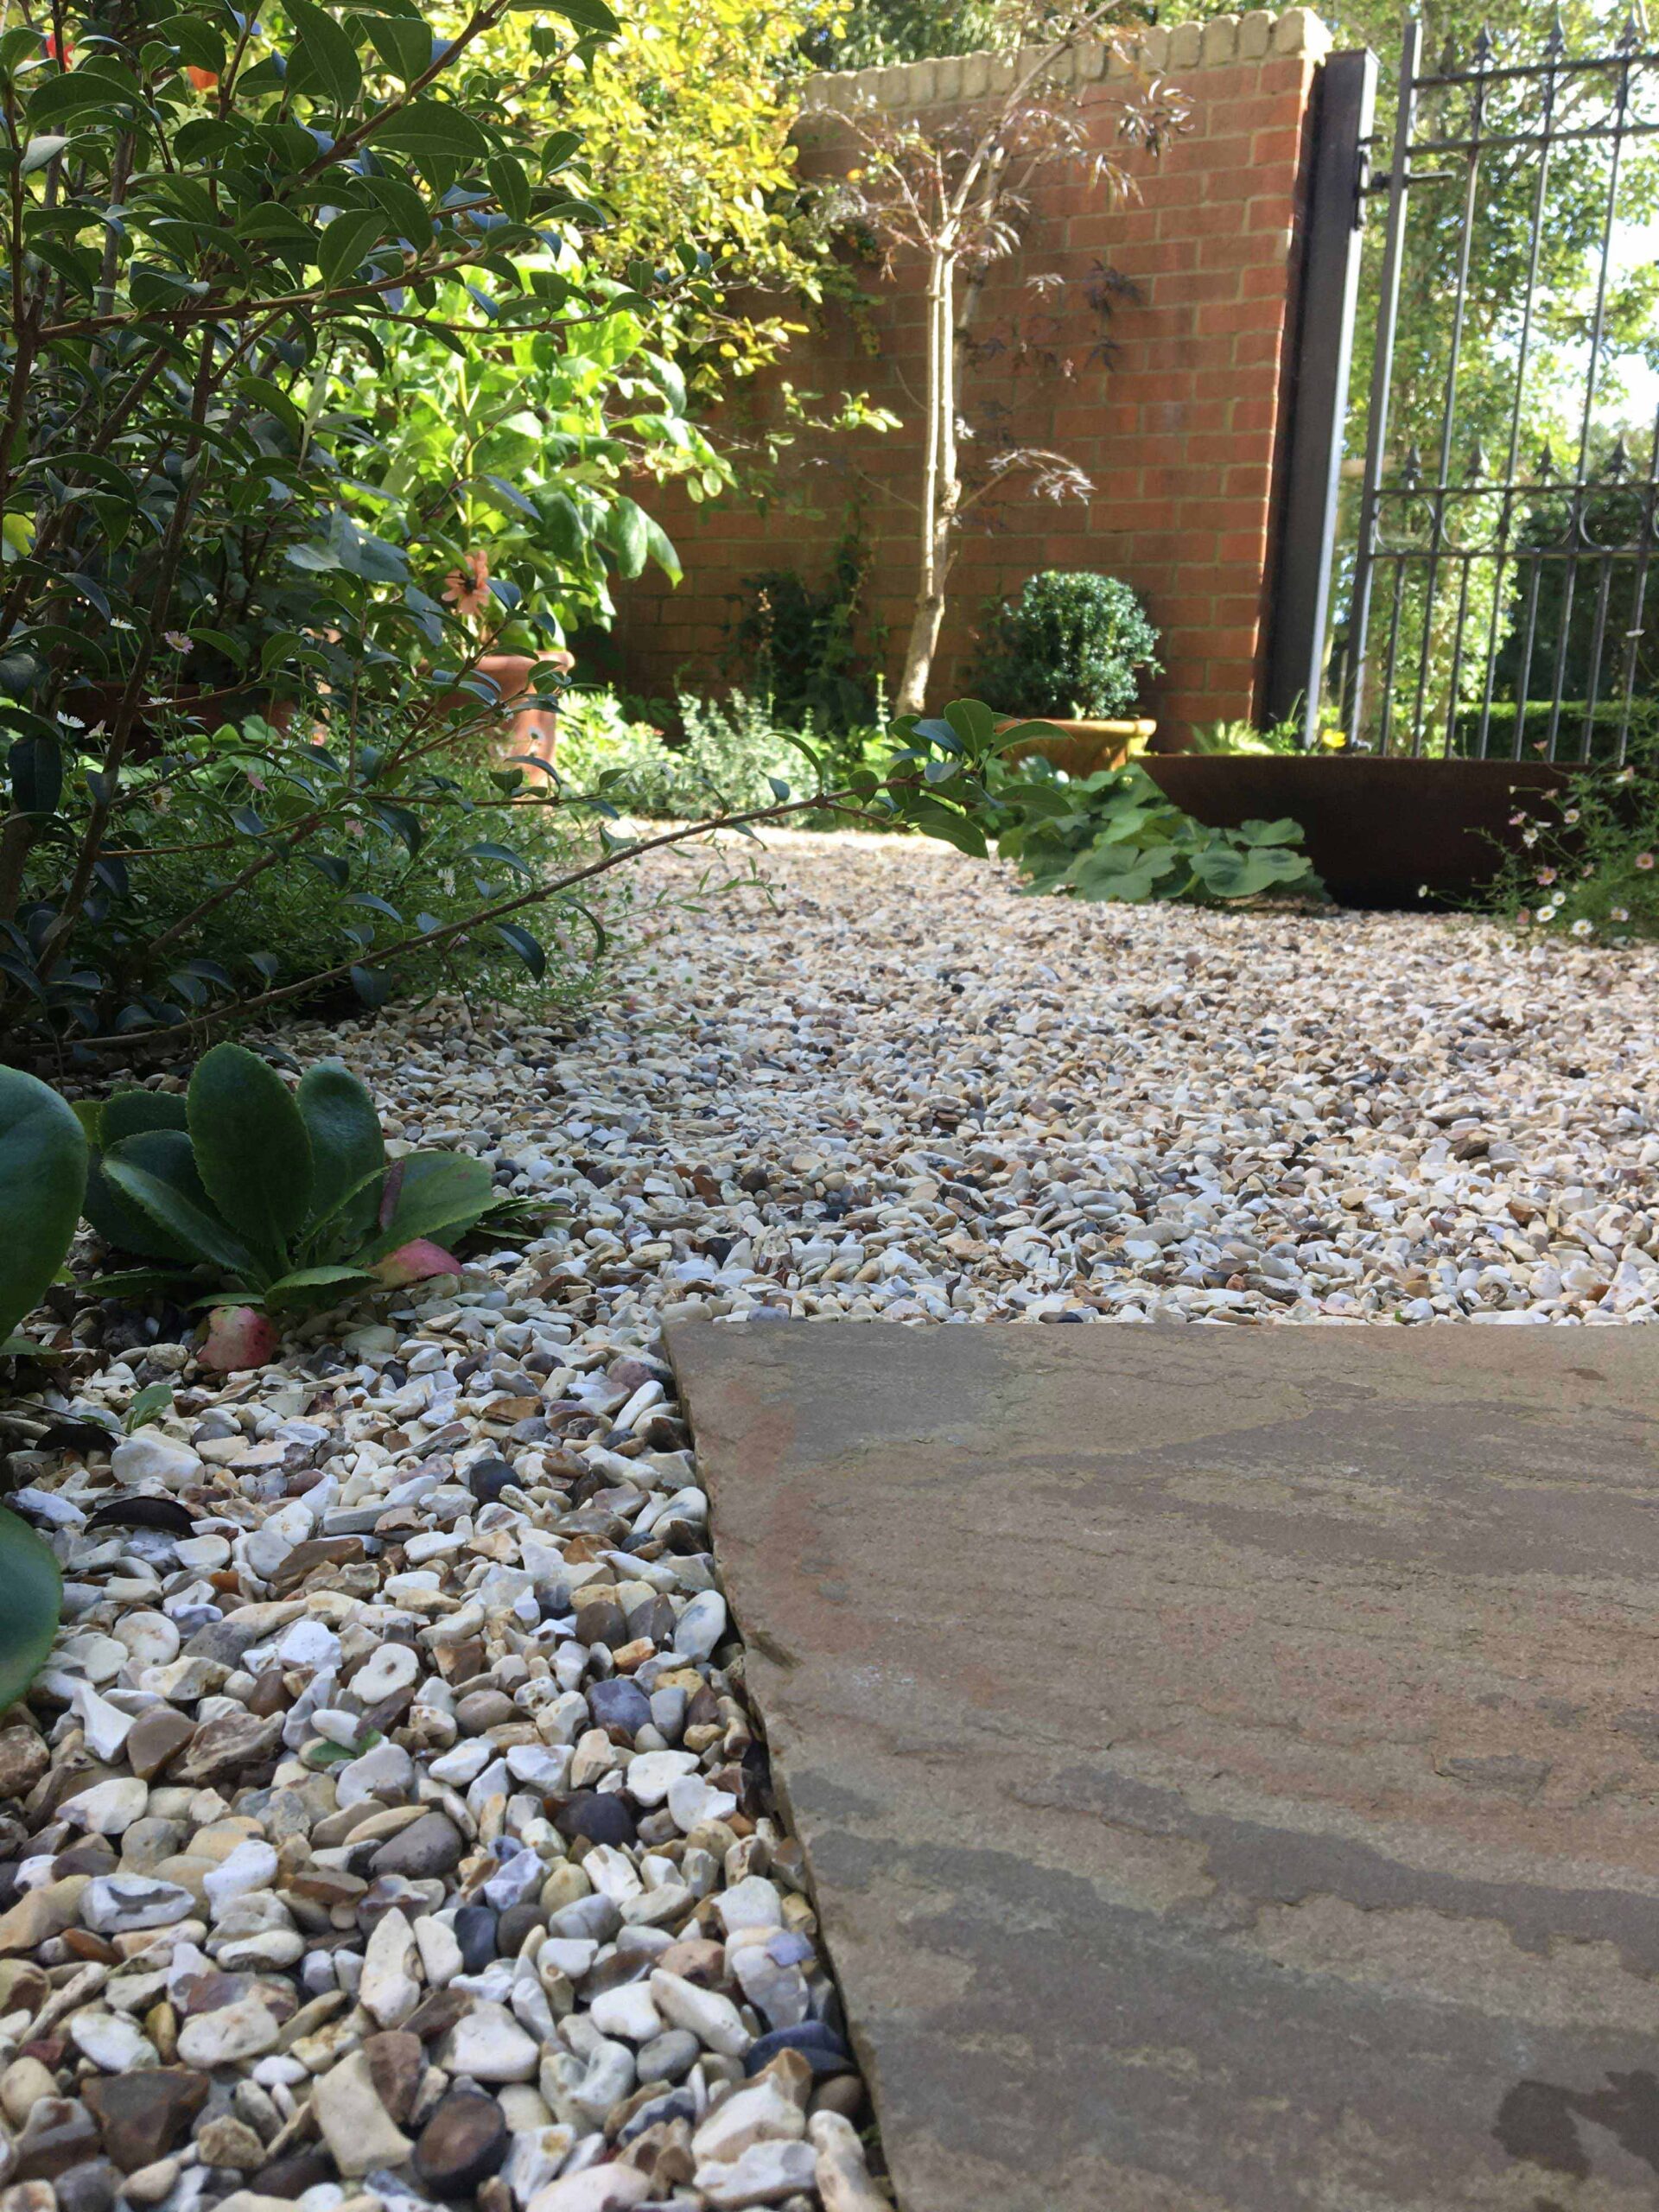 gravel and paving